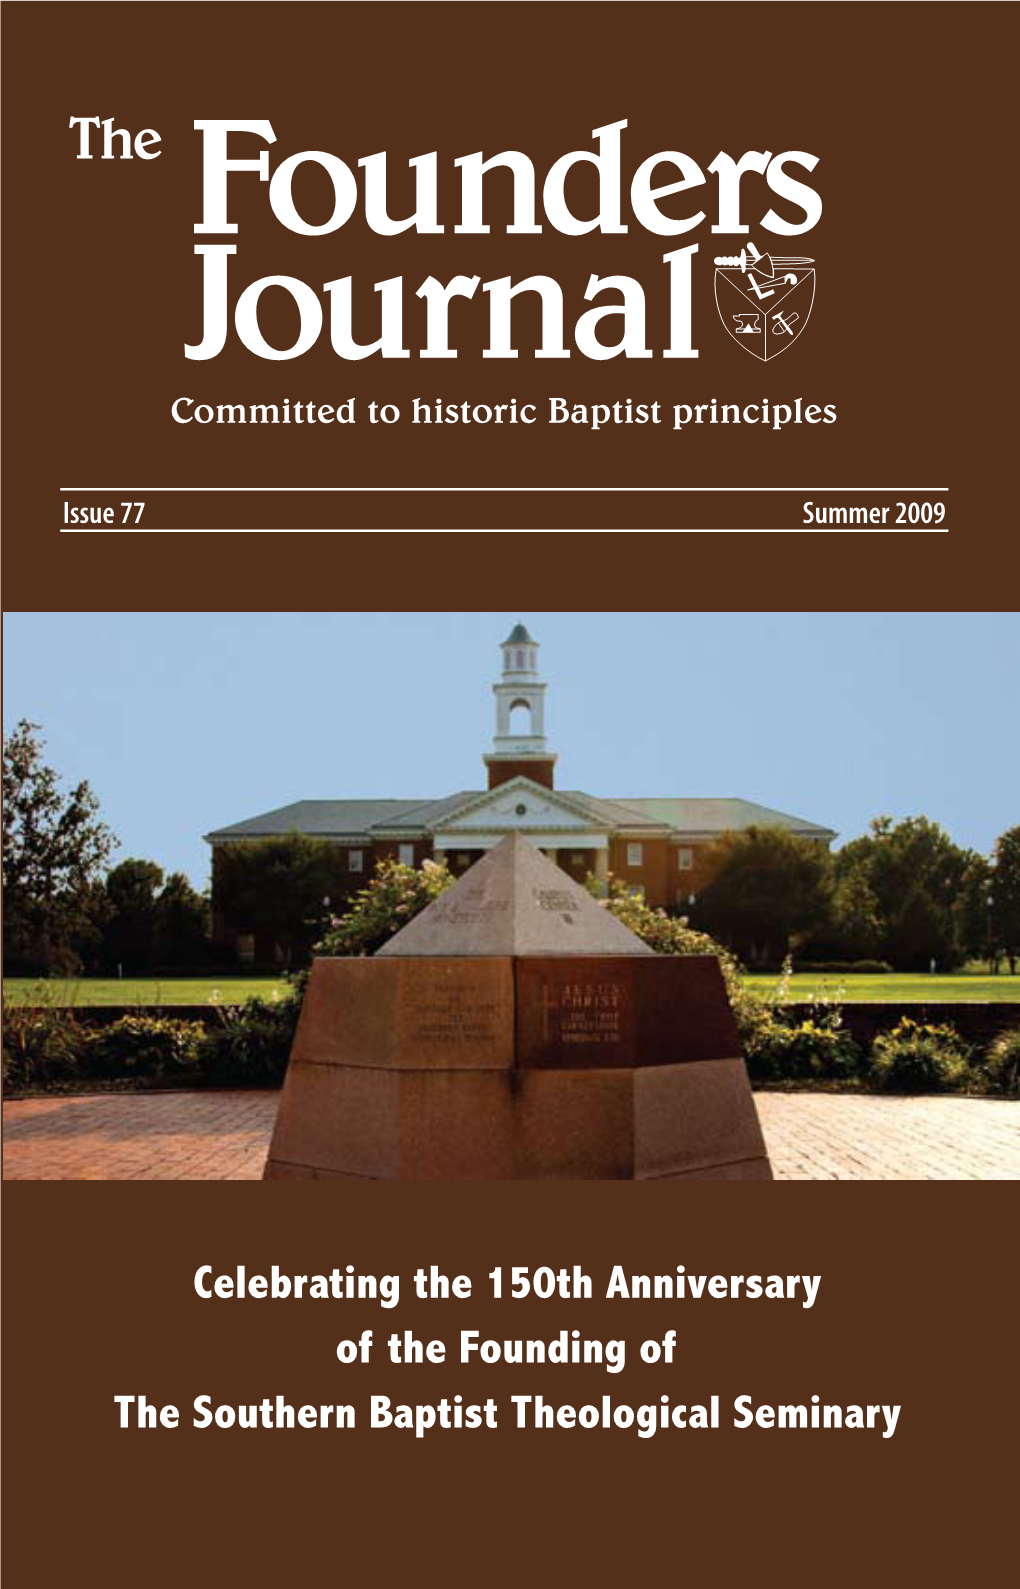 The Founders Journal